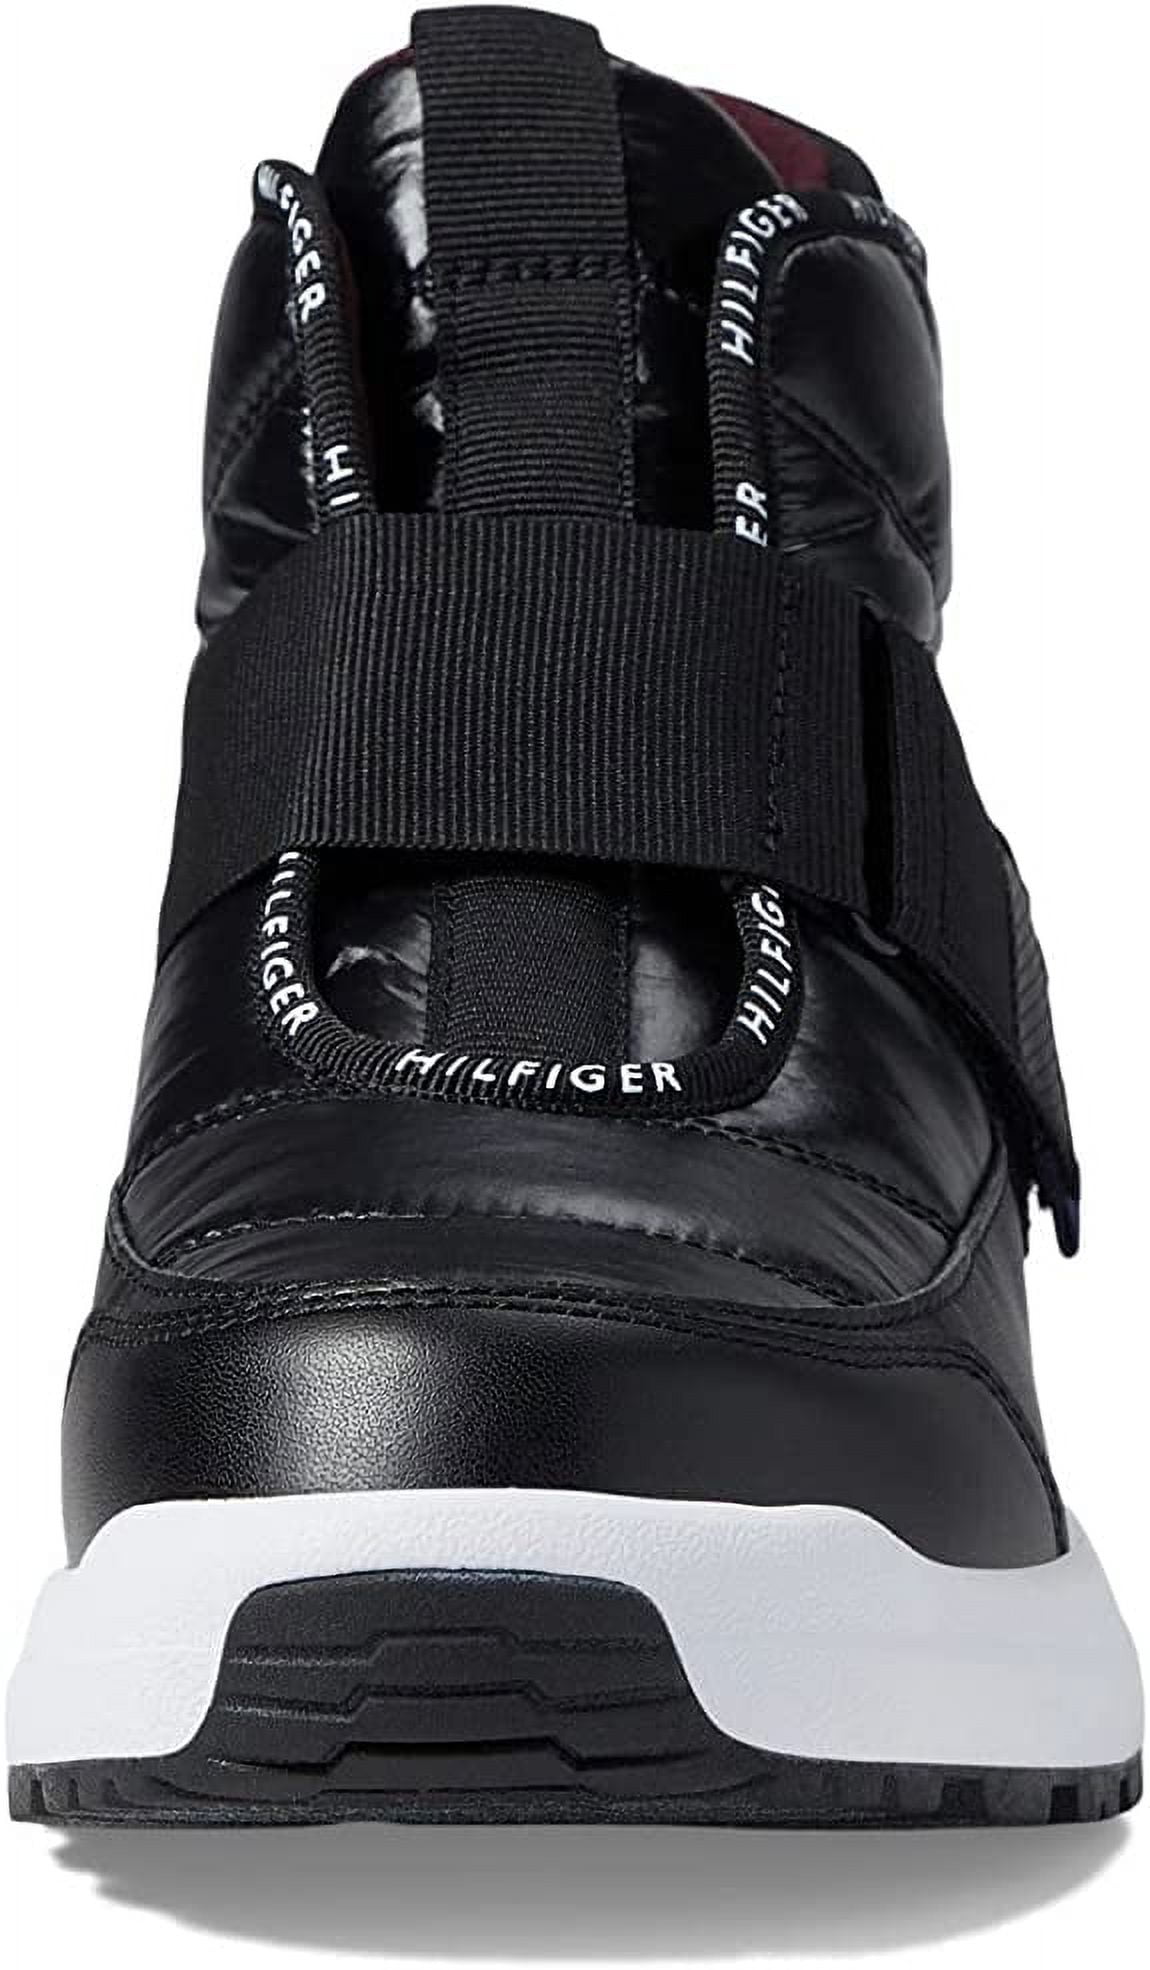 Tommy Hilfiger Olly Black Hook and Loop Rounded Toe Cozy Fashion Sneakers  (Black, 7.5)